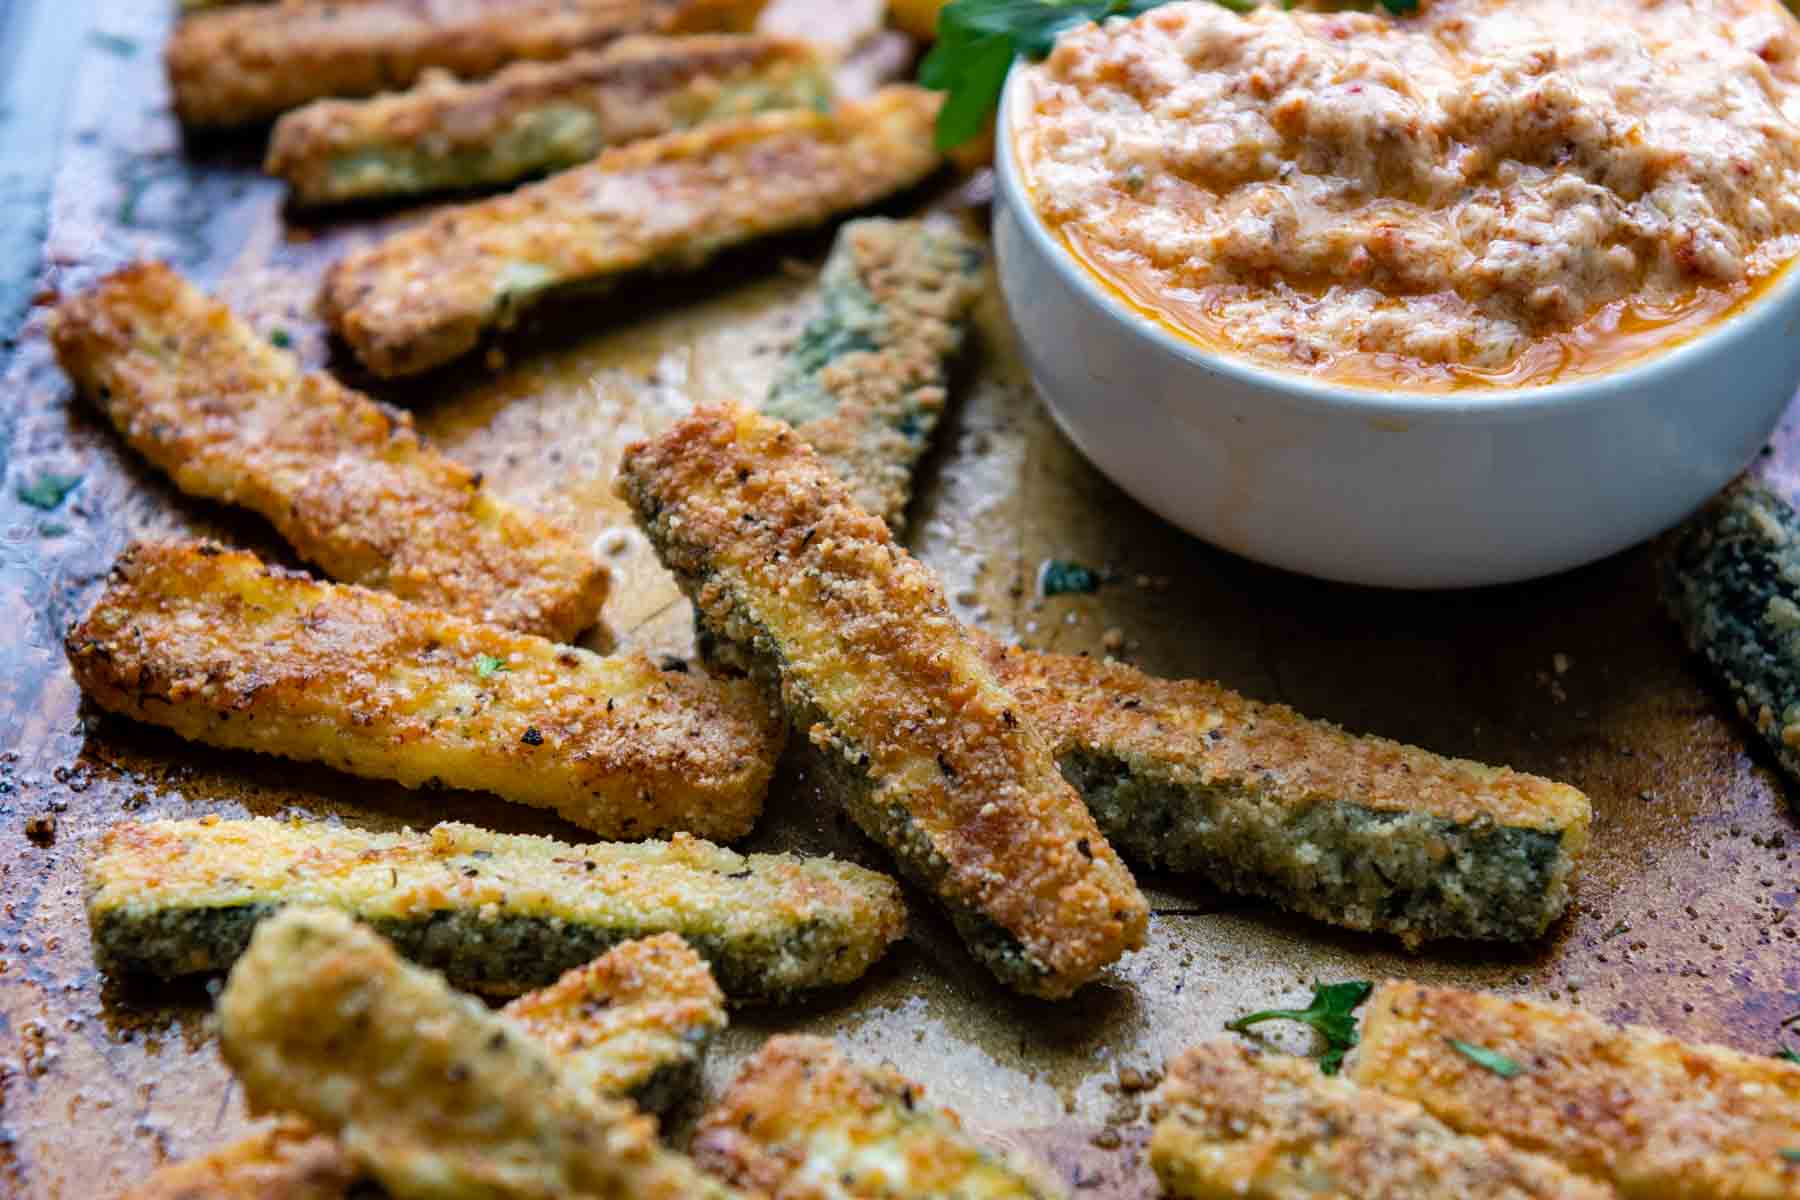 zucchini fries with a cup of dipping sauce in the background.